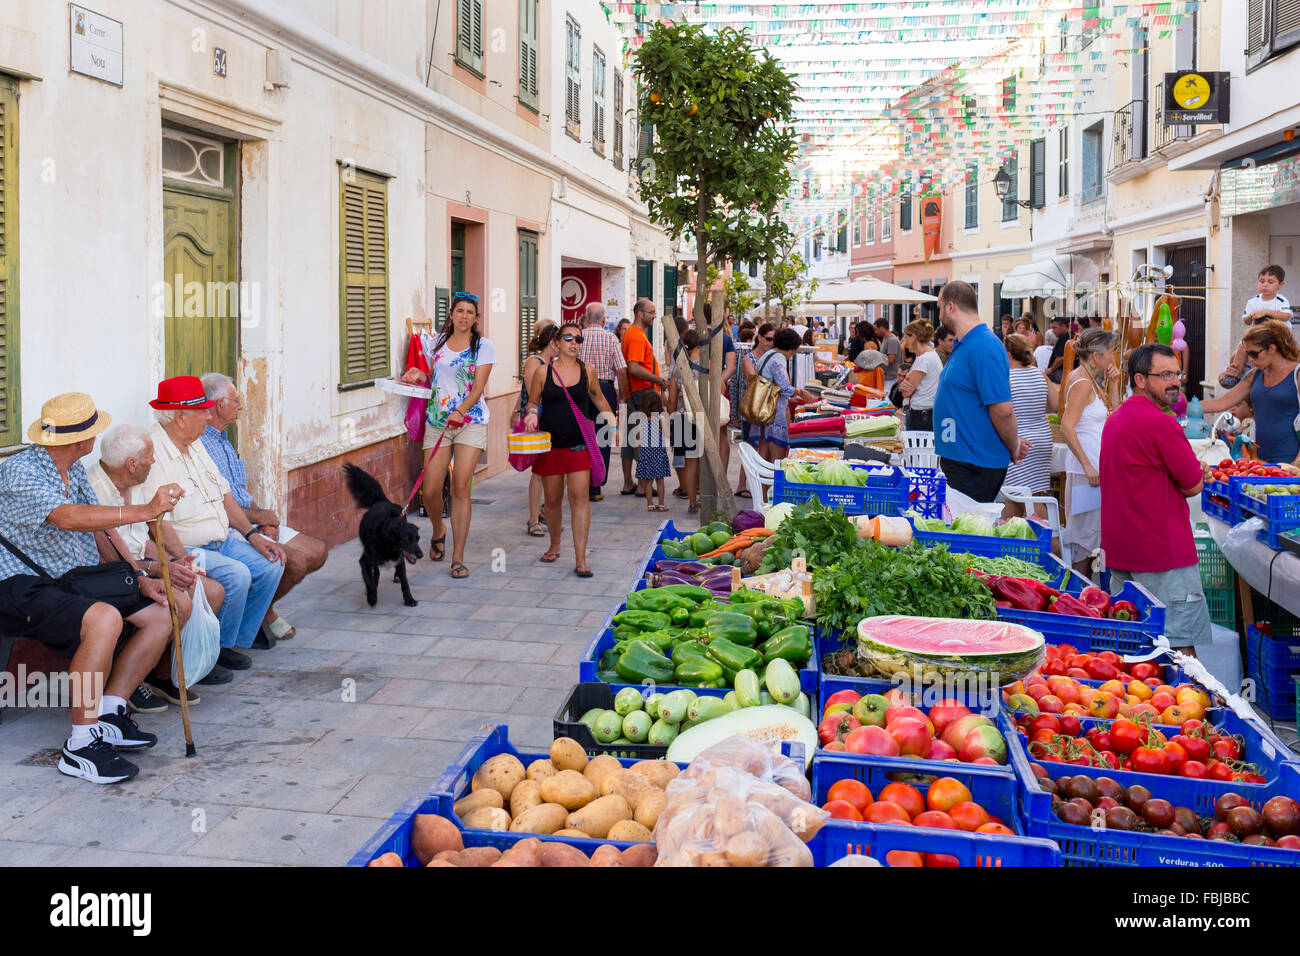 Weekly market in Es Mercadal, centre of the island Menorca, the Balearic Islands, Spain, Southern Europe Stock Photo